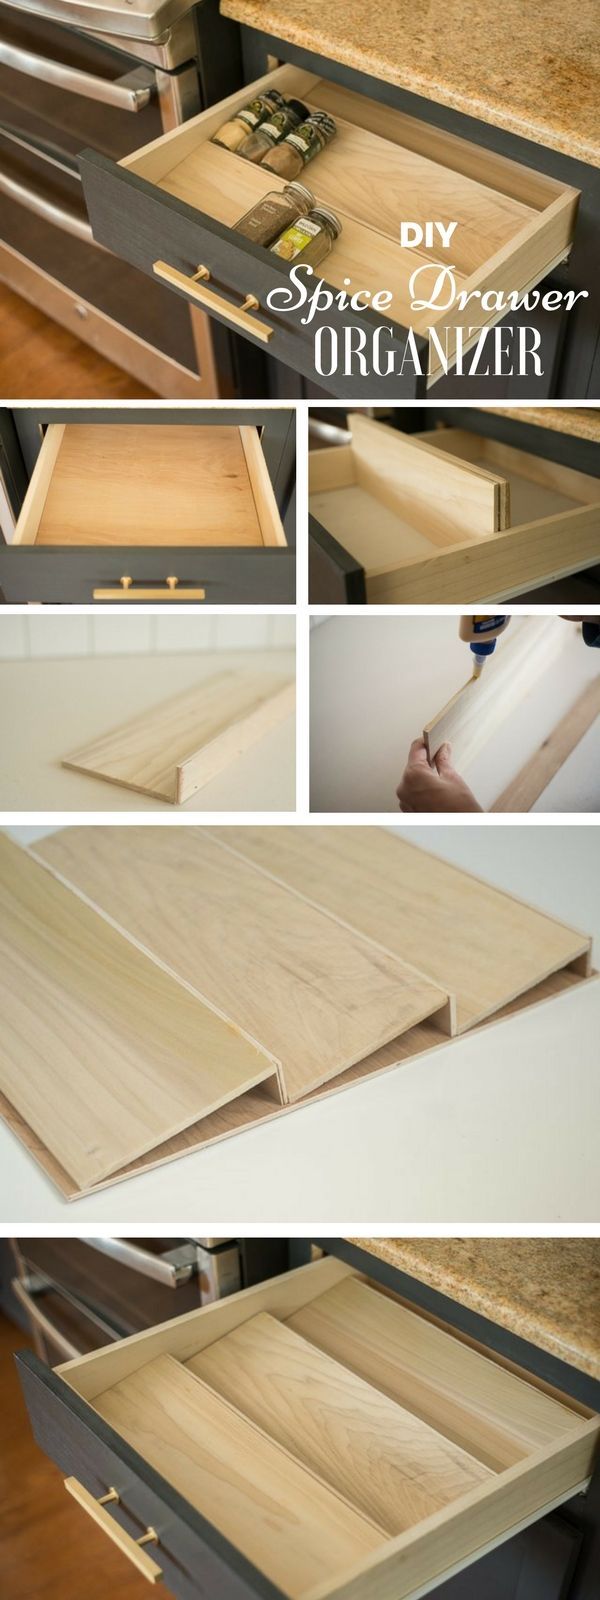 Check out the tutorial: #DIY Spice Drawer Organizer @istandarddesign